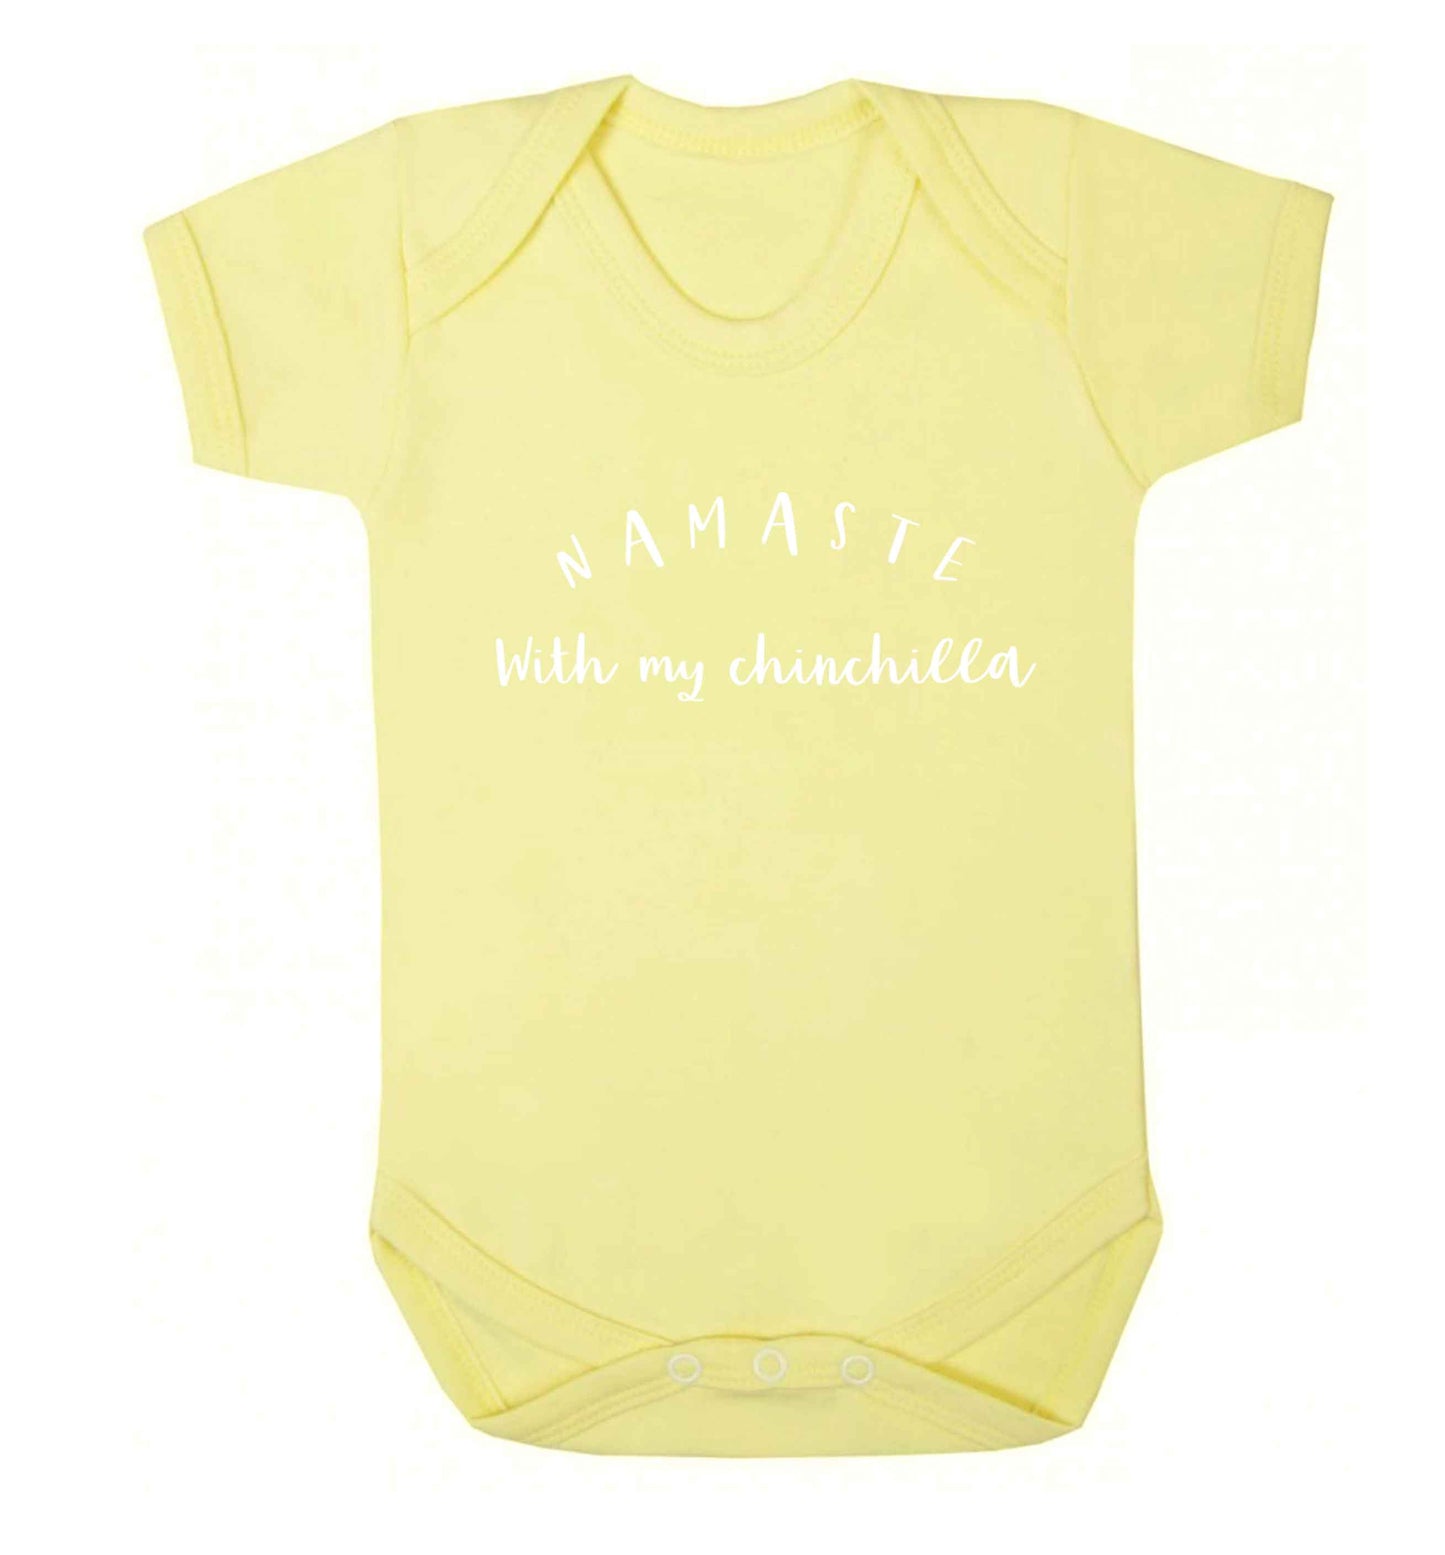 Namaste with my chinchilla Baby Vest pale yellow 18-24 months